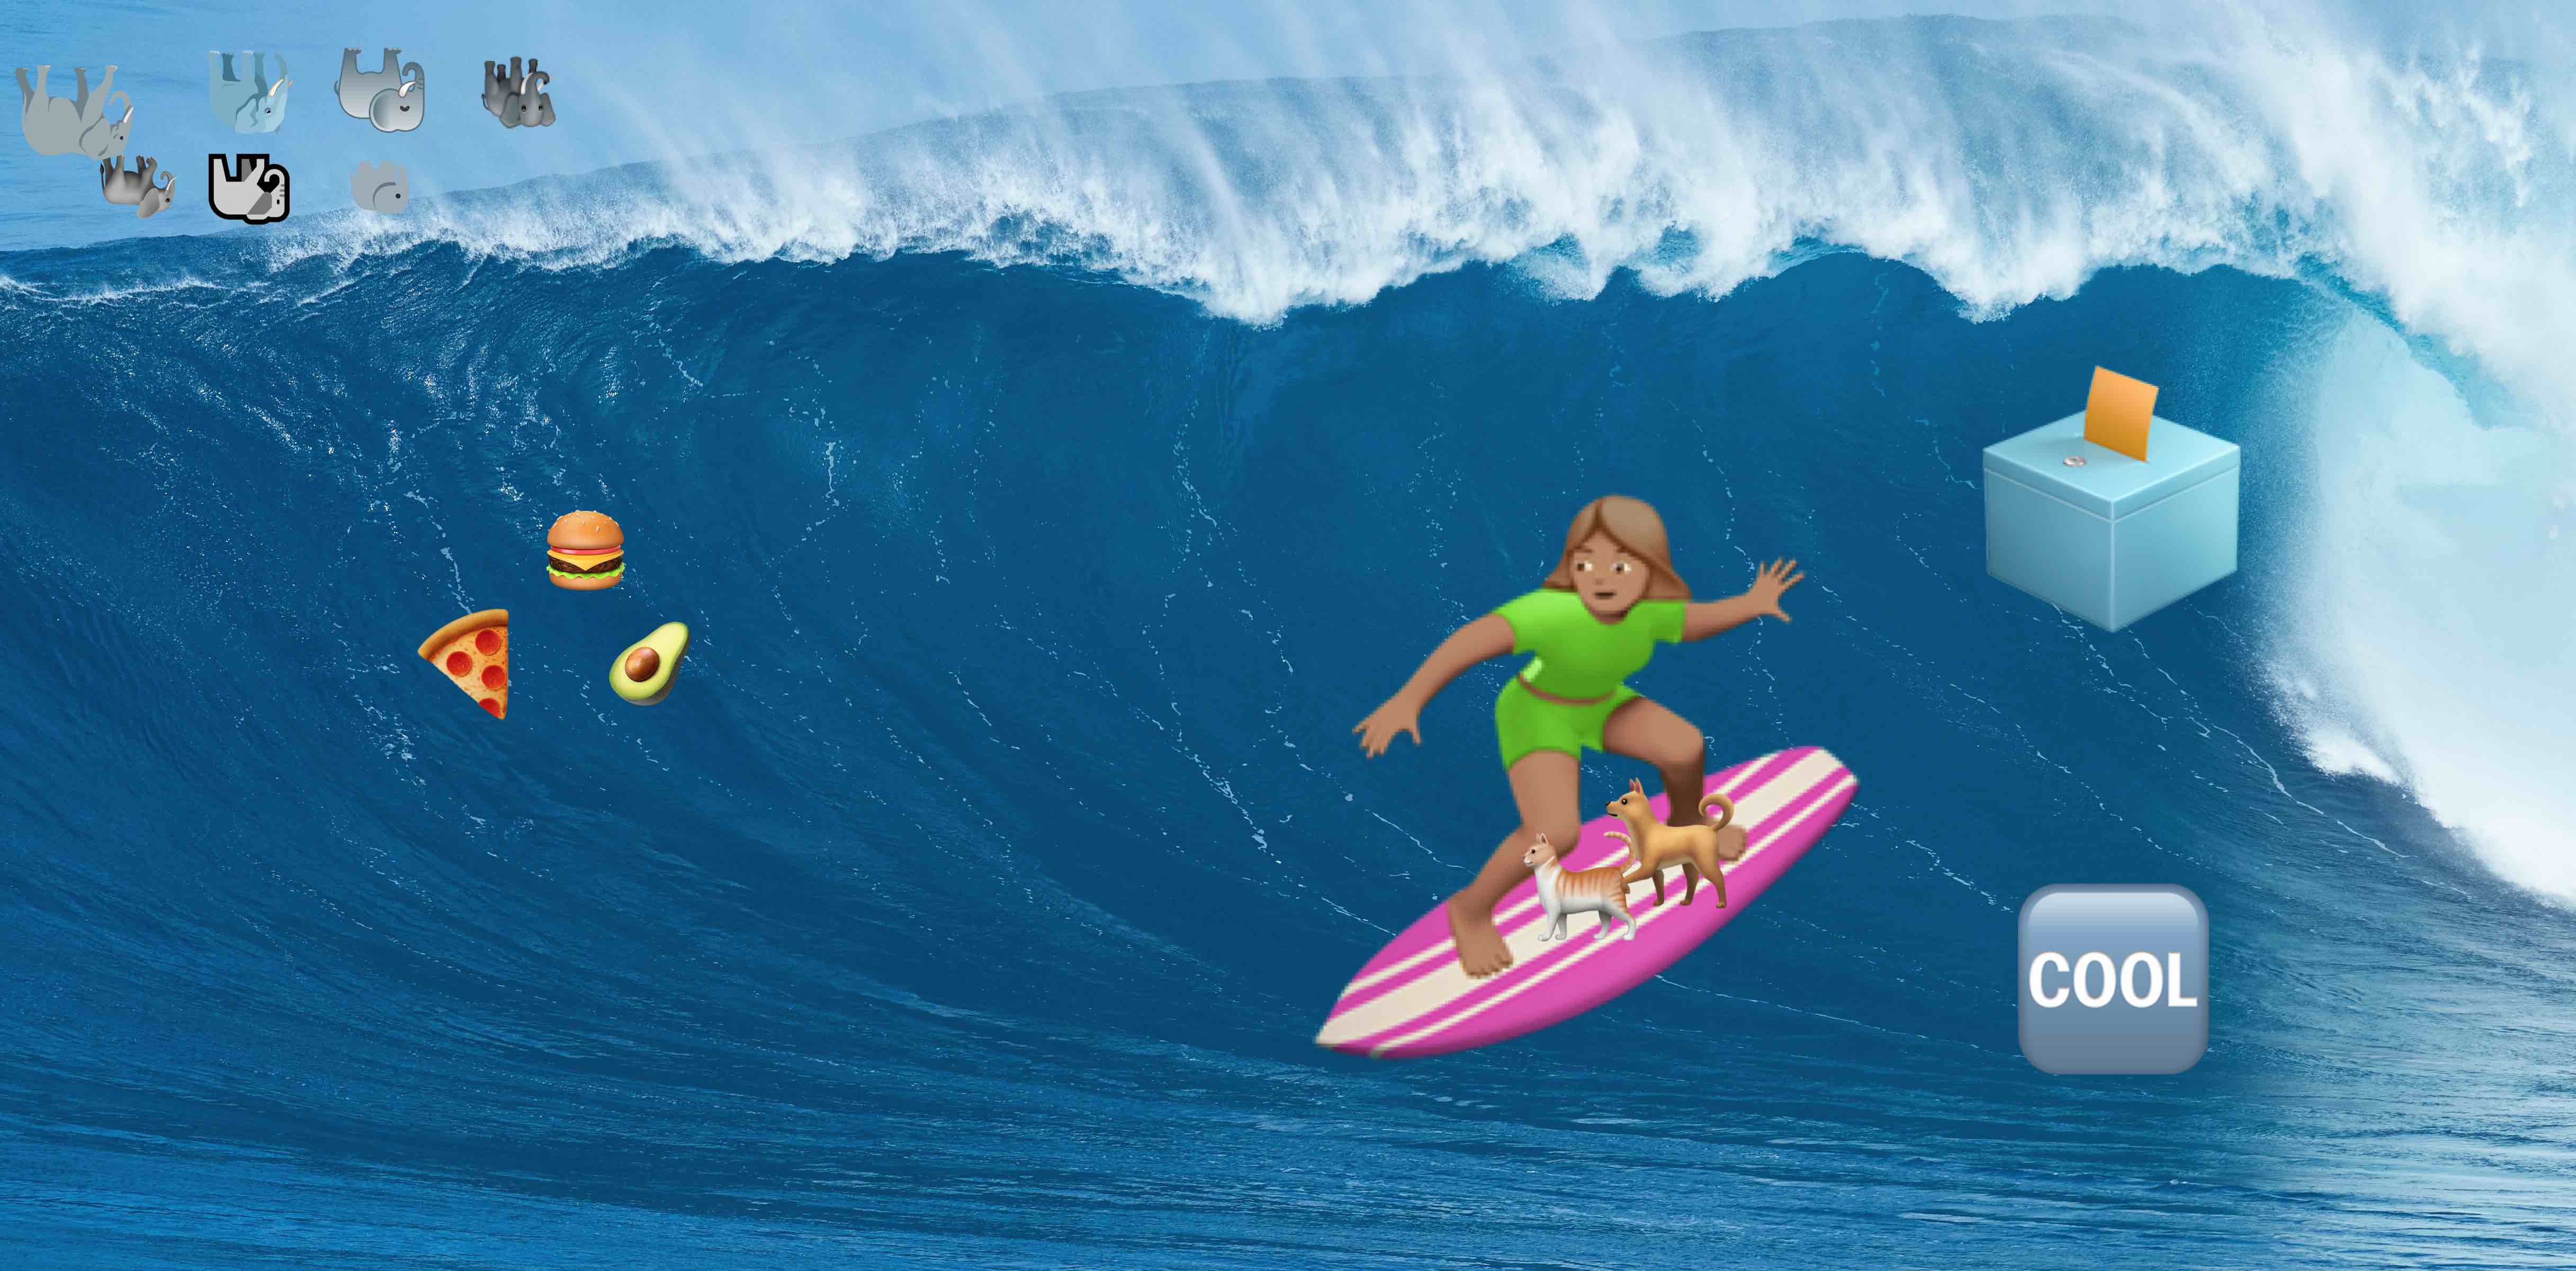 A woman, a cat, and a dog ride a surfboard on a large wave. To their left on the wave are the ballot box and "COOL" emojis. To their right on the wave are the avocado, hamburger, and pizza emojis. Behind the wave, flipped upsidedown, are several elephants.